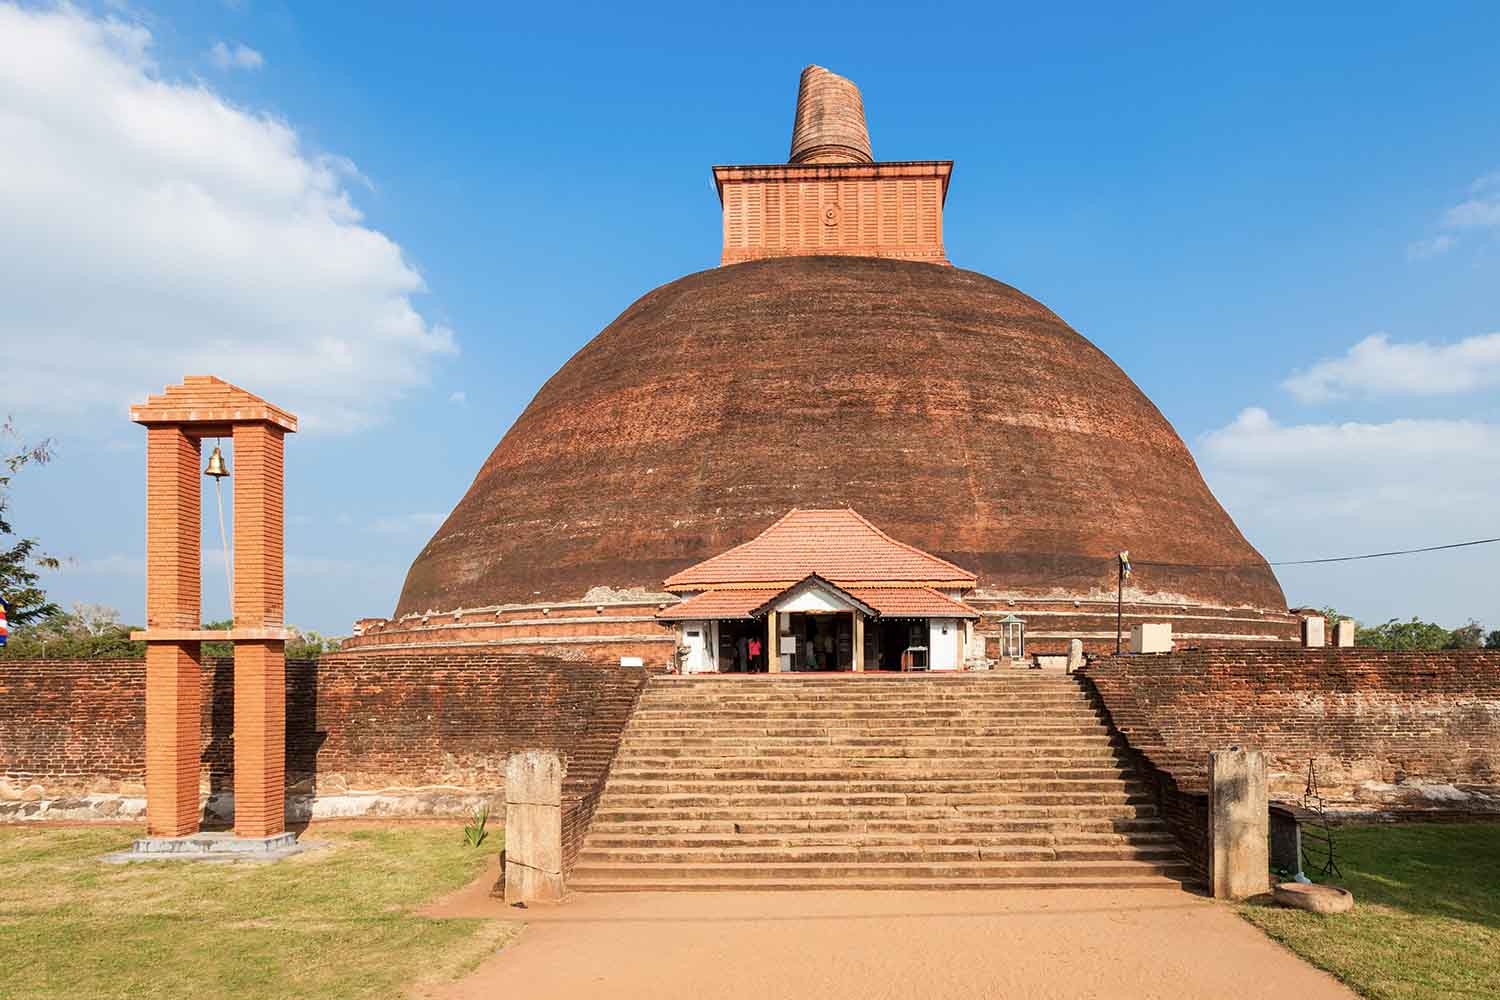 Front entrance to the Jetavanaramaya temple, showing a large red brick dome